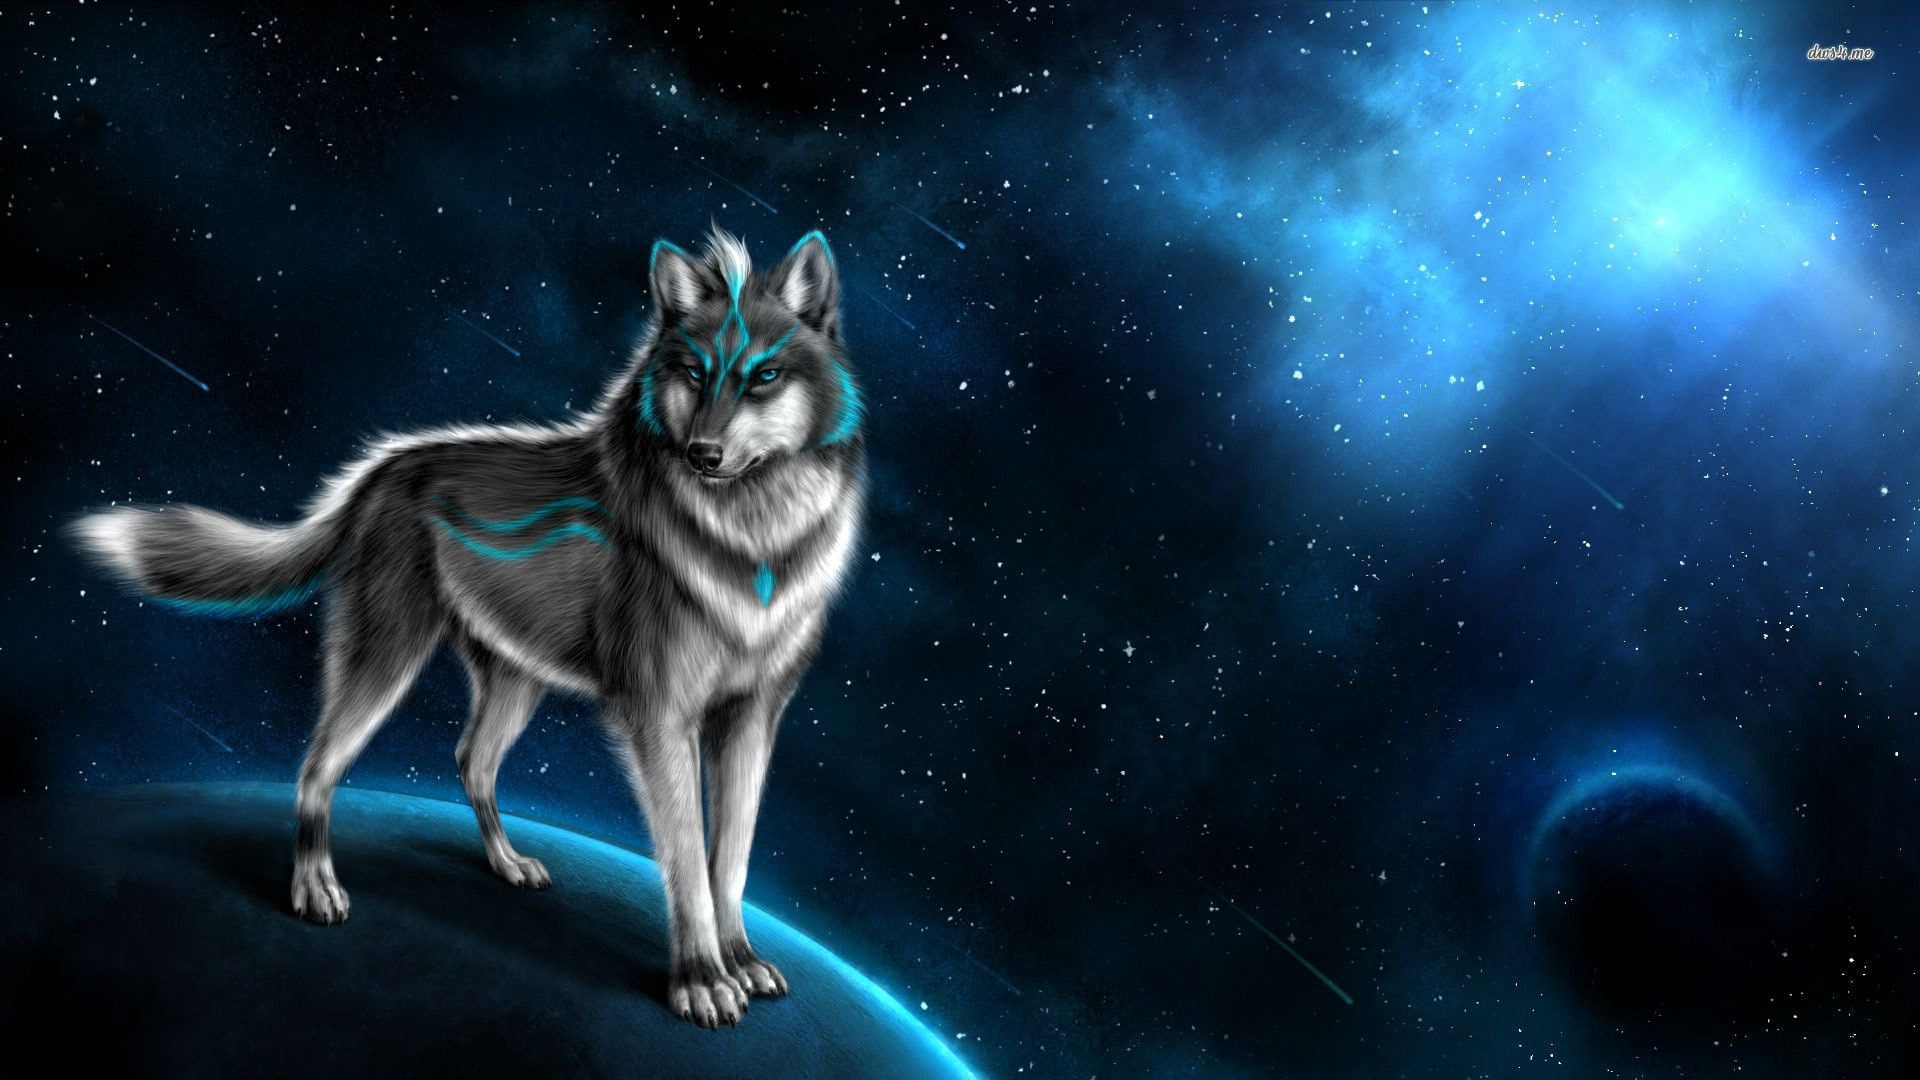 1920x1080 Wolf Fantasy Wallpapers Group 1920Ã1080